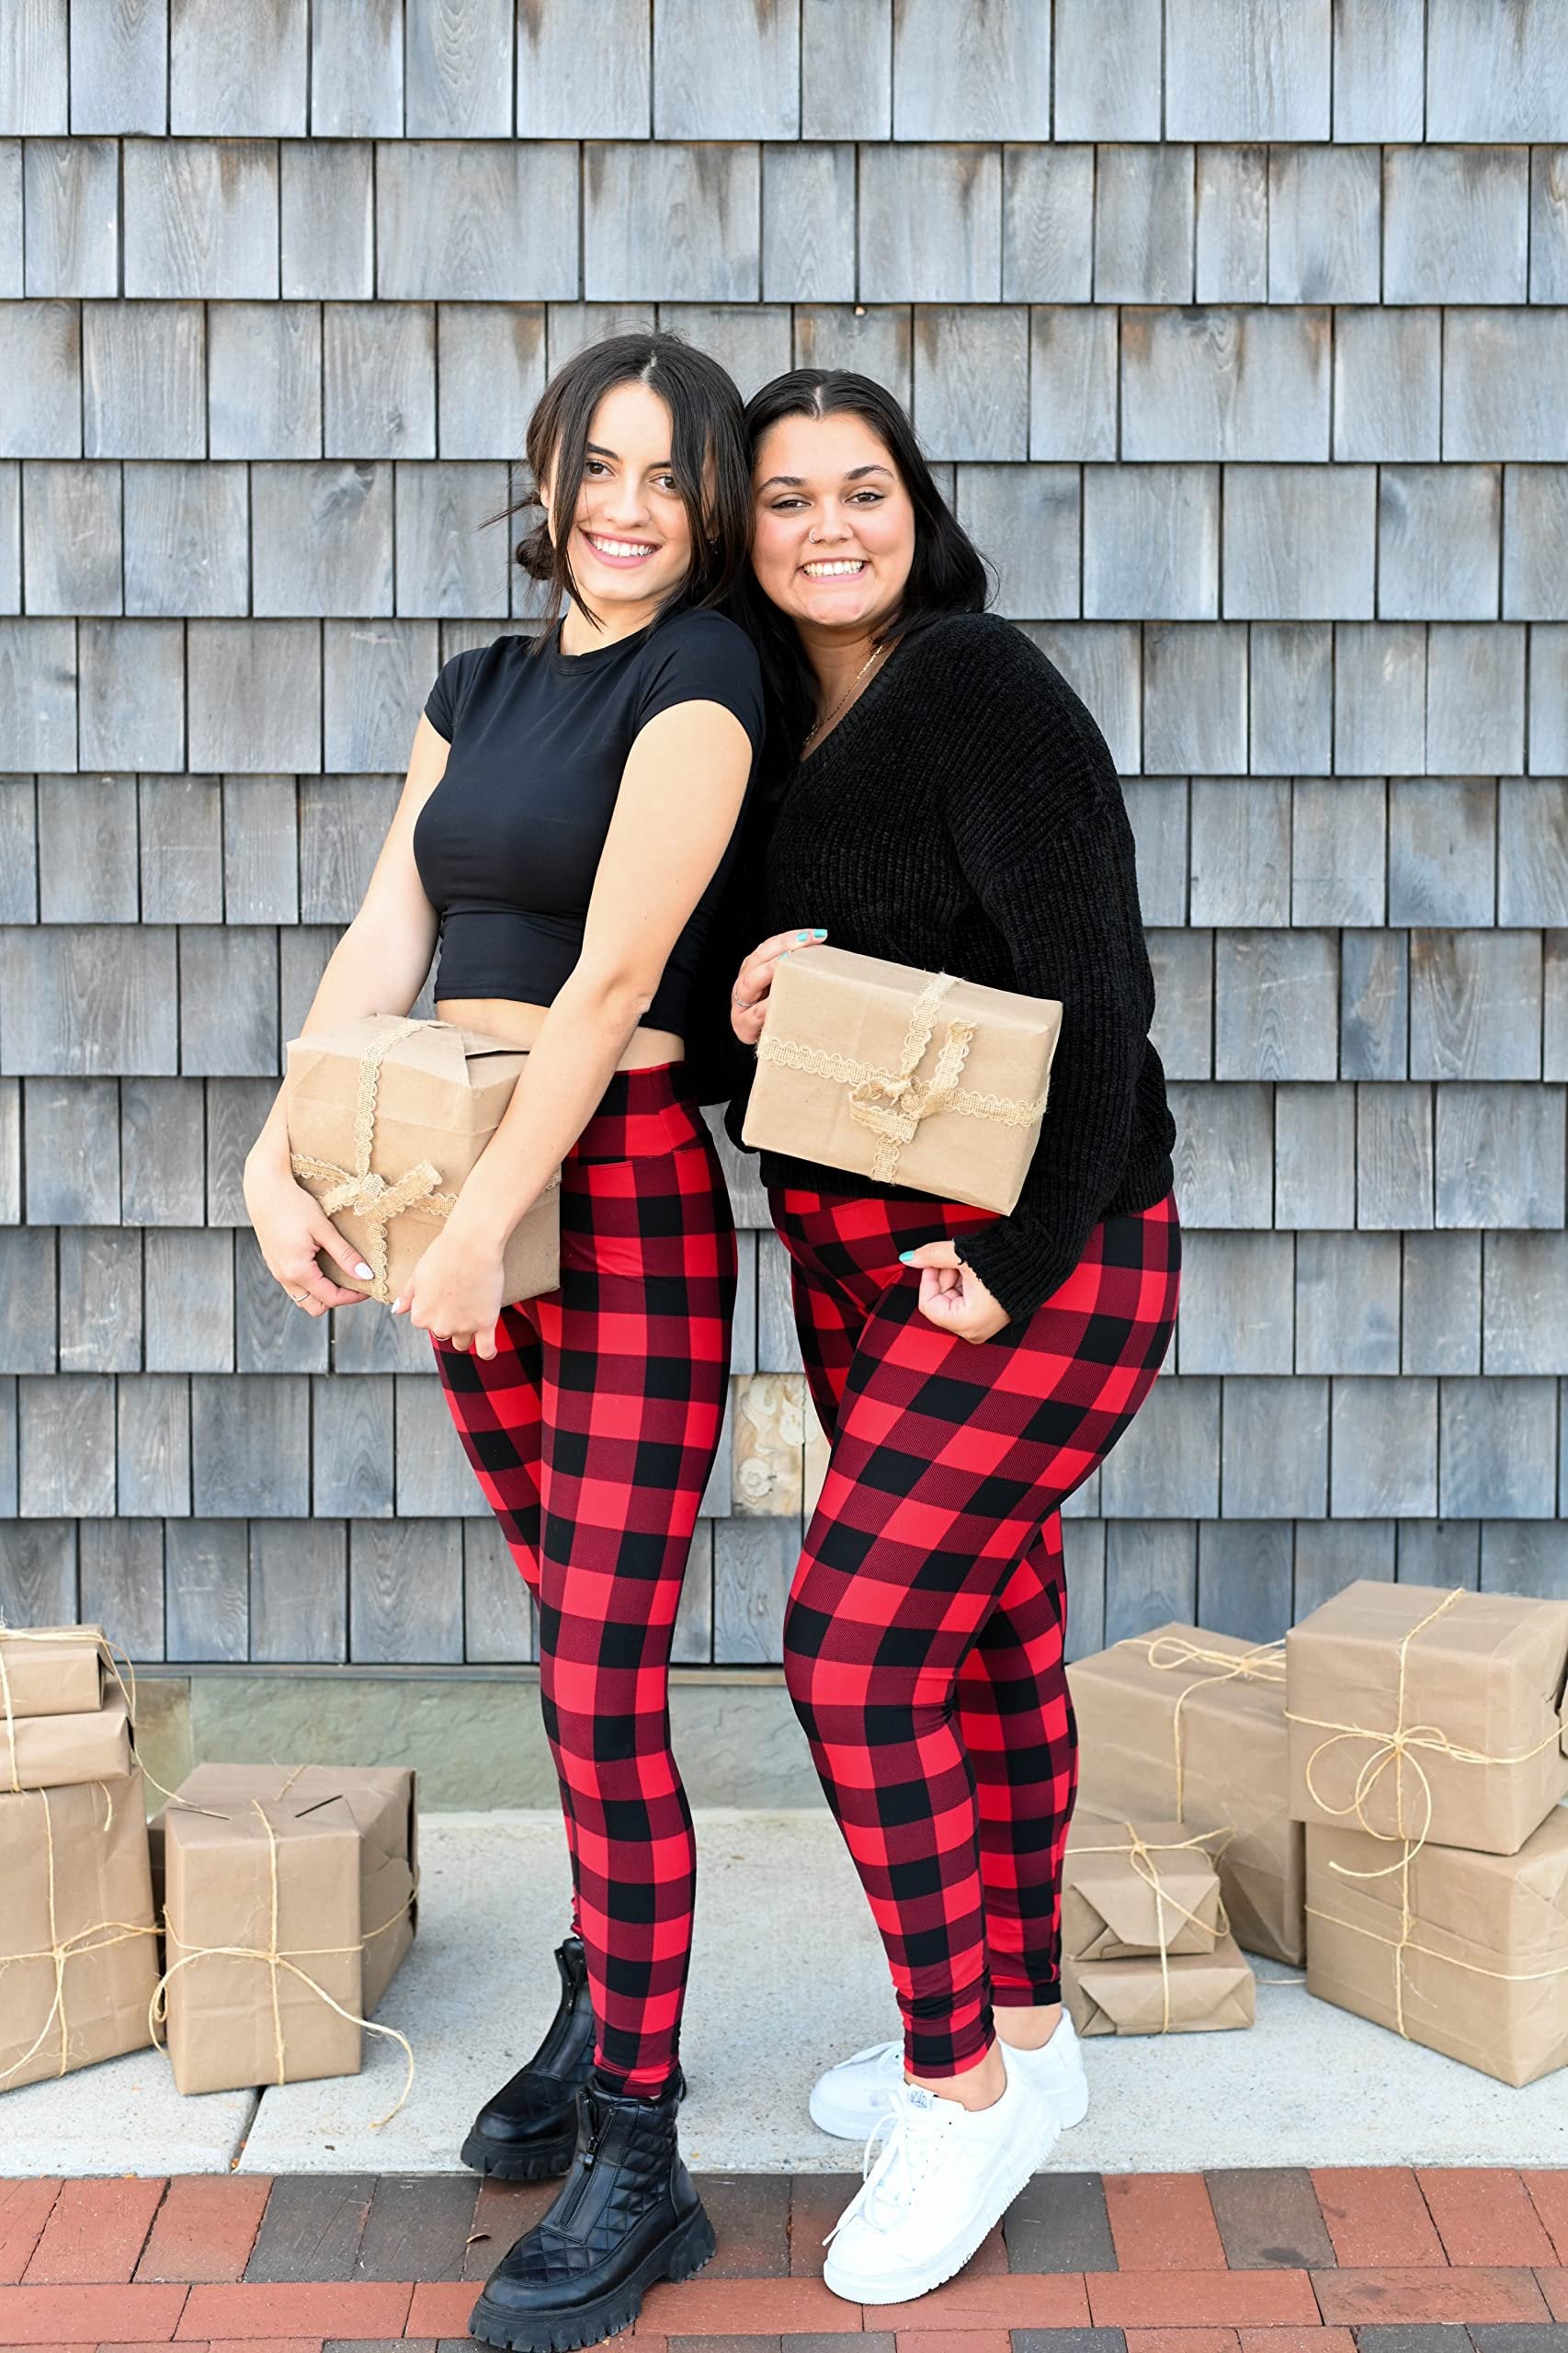 Women's Red Plaid Highwaisted Leggings - Buttery Soft, One Size, Free Shipping